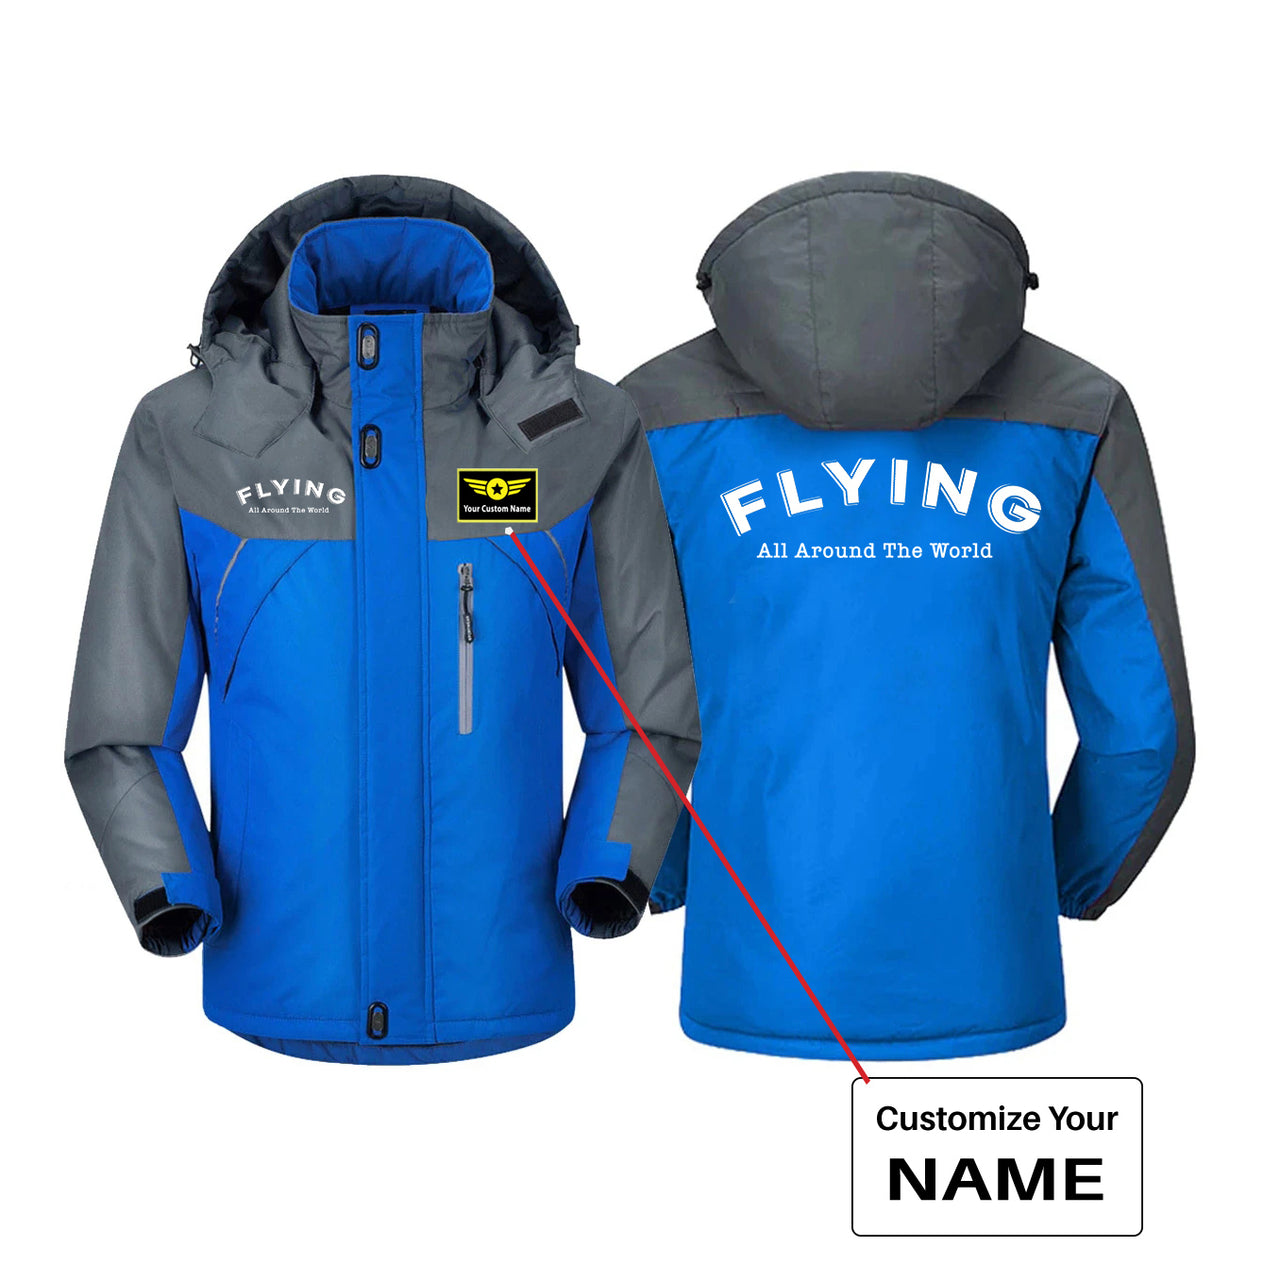 Flying All Around The World Designed Thick Winter Jackets